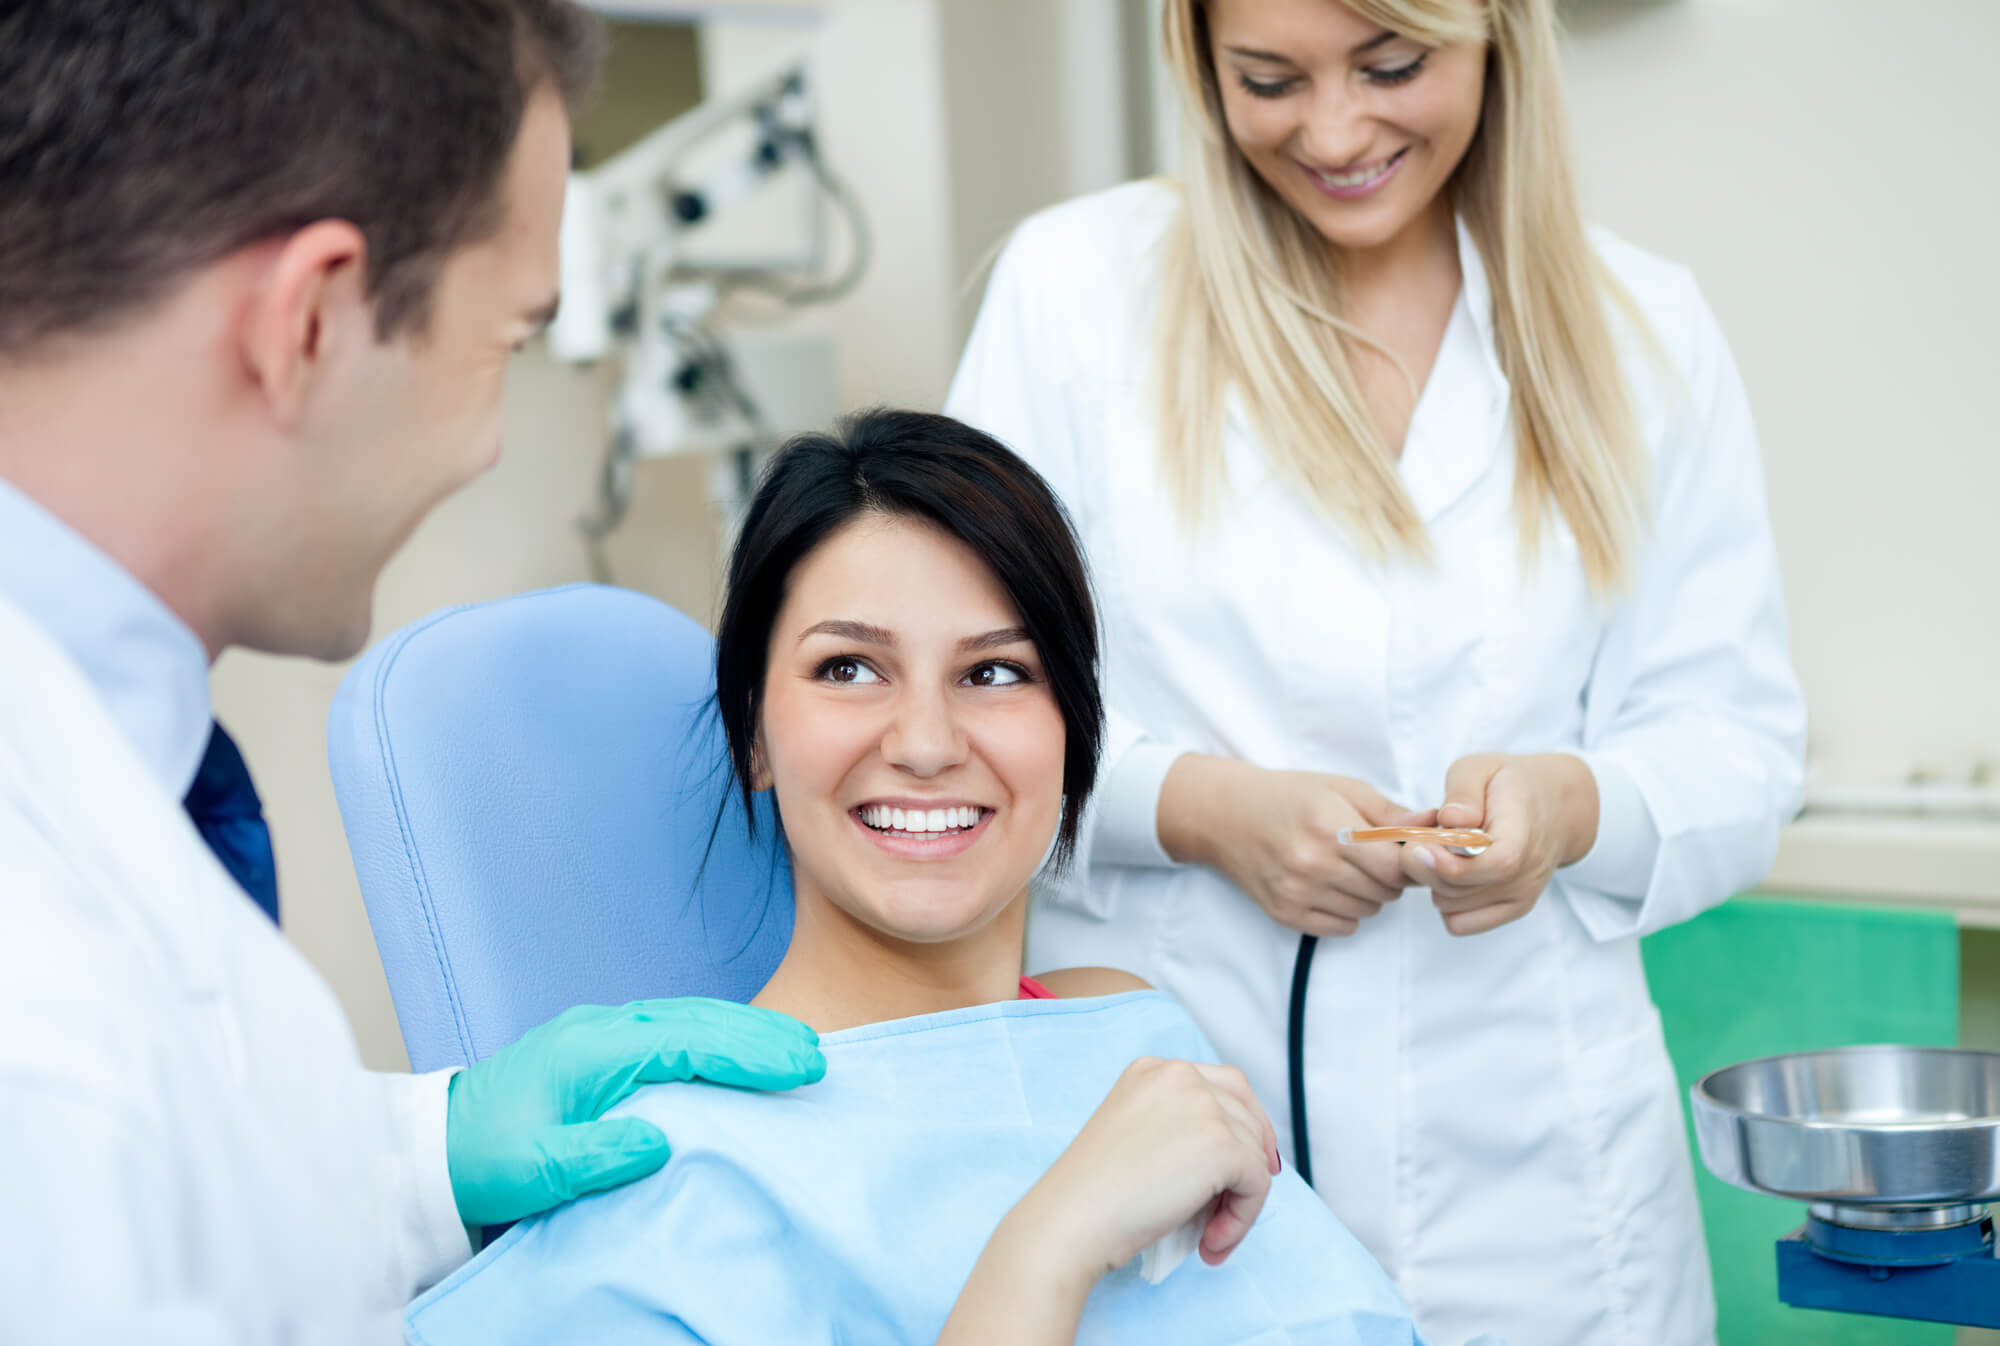 who offers the best dentist windermere?